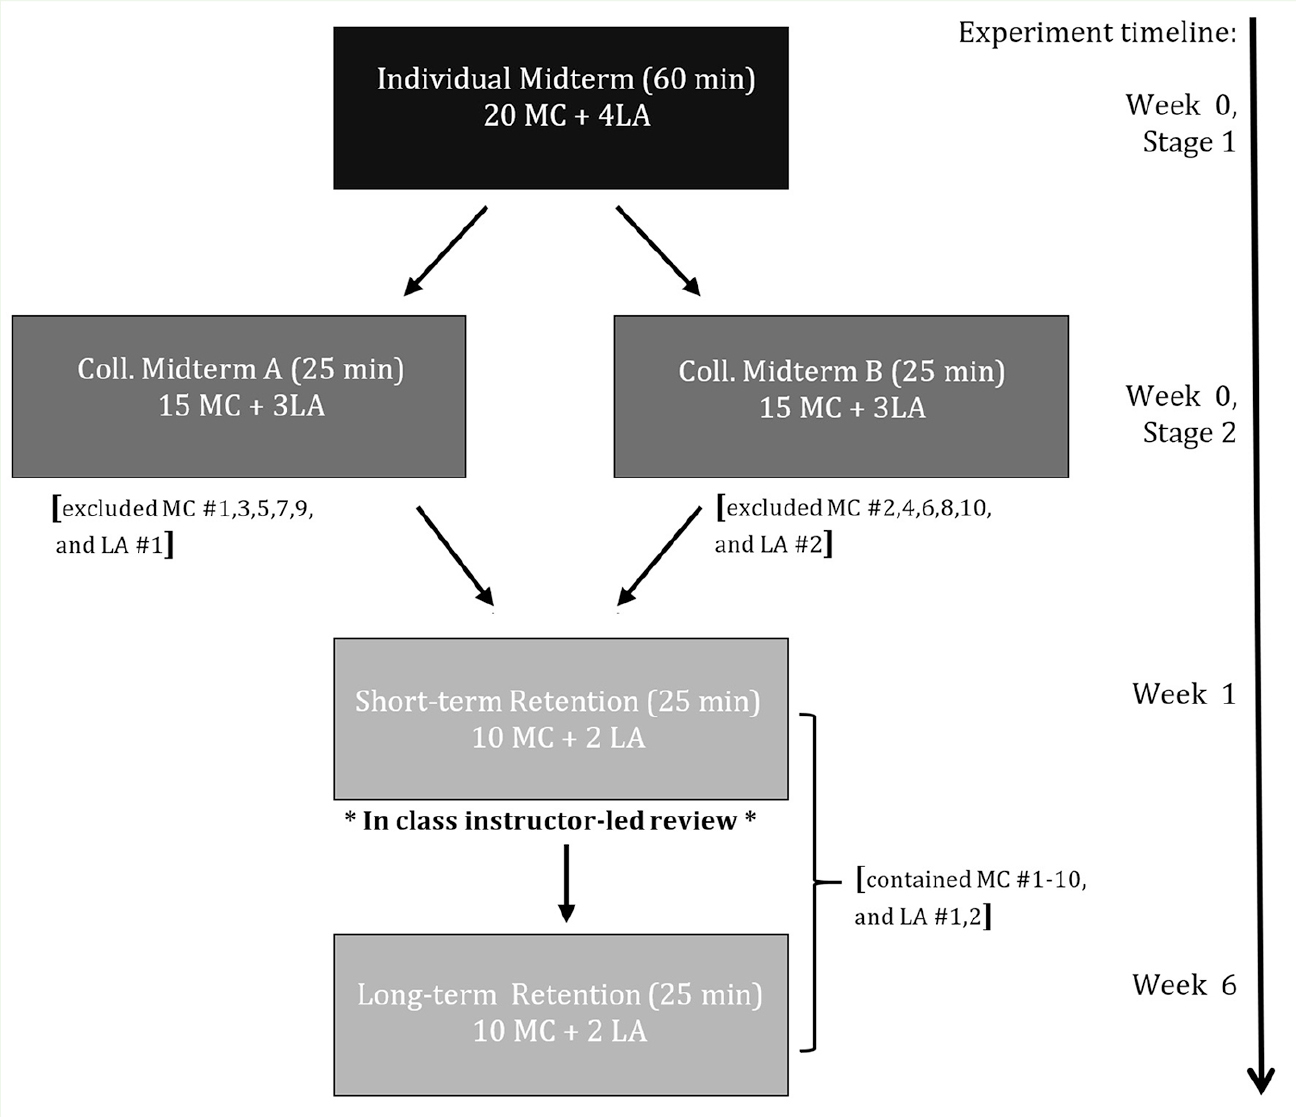 Flowchart of experimental design from Week 0 (original midterm) to week 6, which included the two-stage testing and retention interventions (MC = multiple choice, LA = long answer).